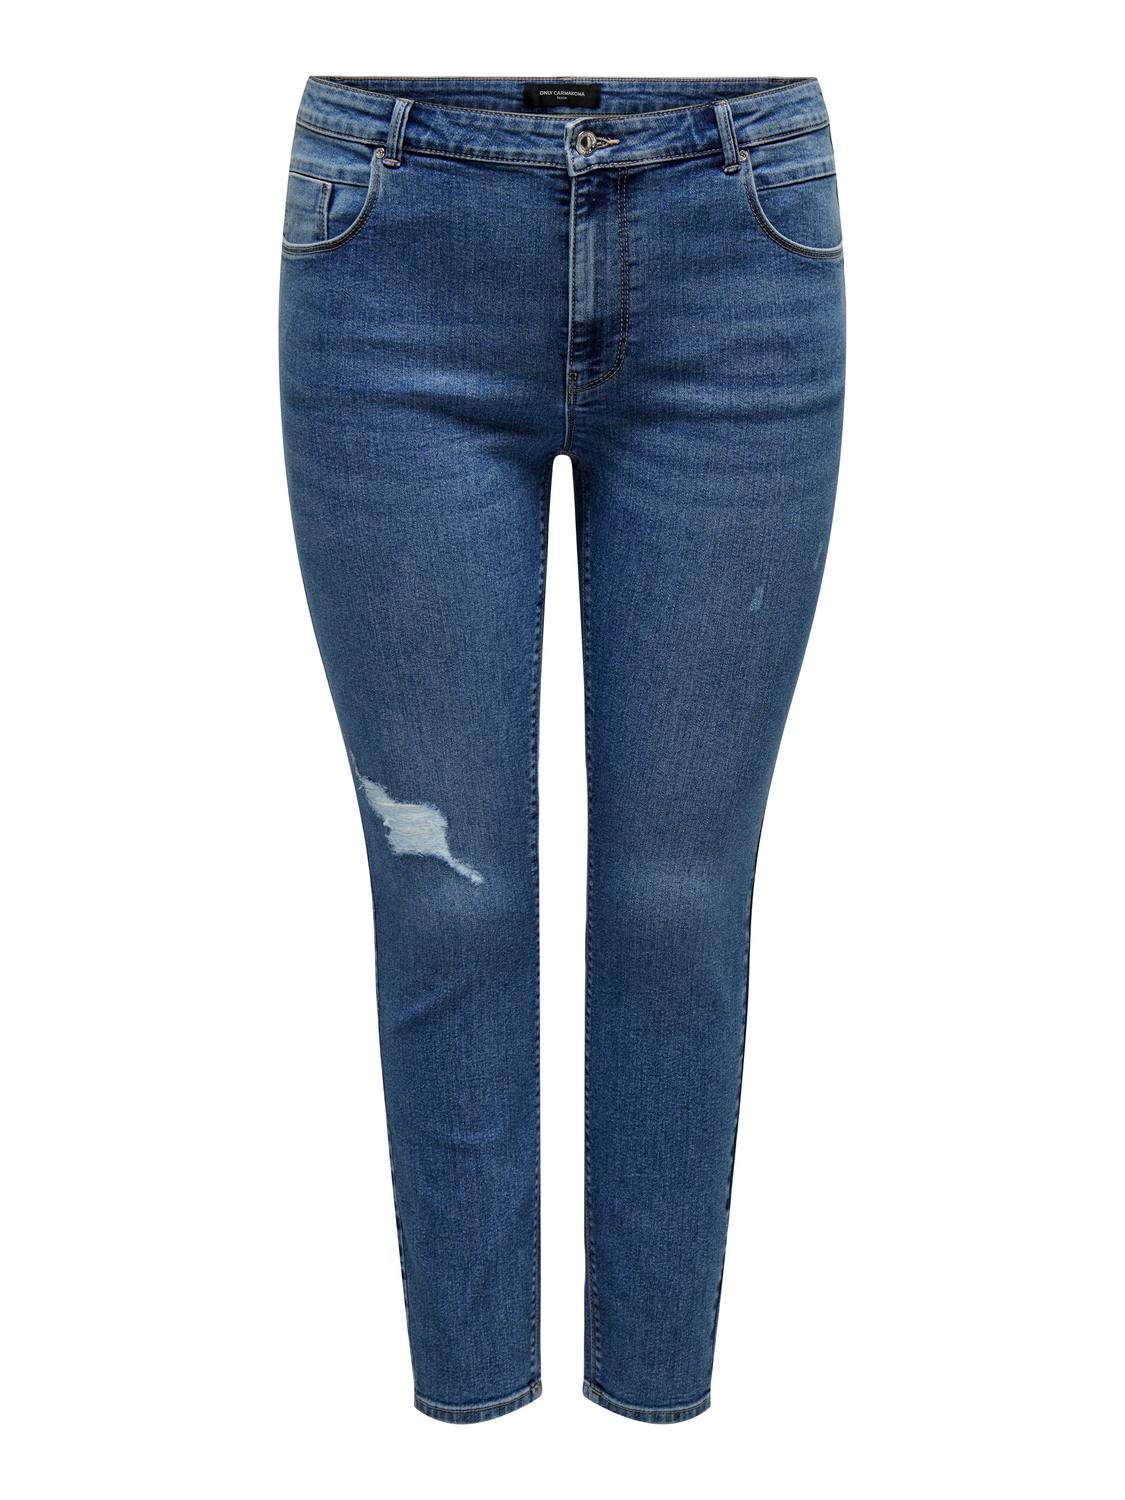 ONLY Jeans Skinny Fit Taille moyenne -Medium Blue Denim - 15300125